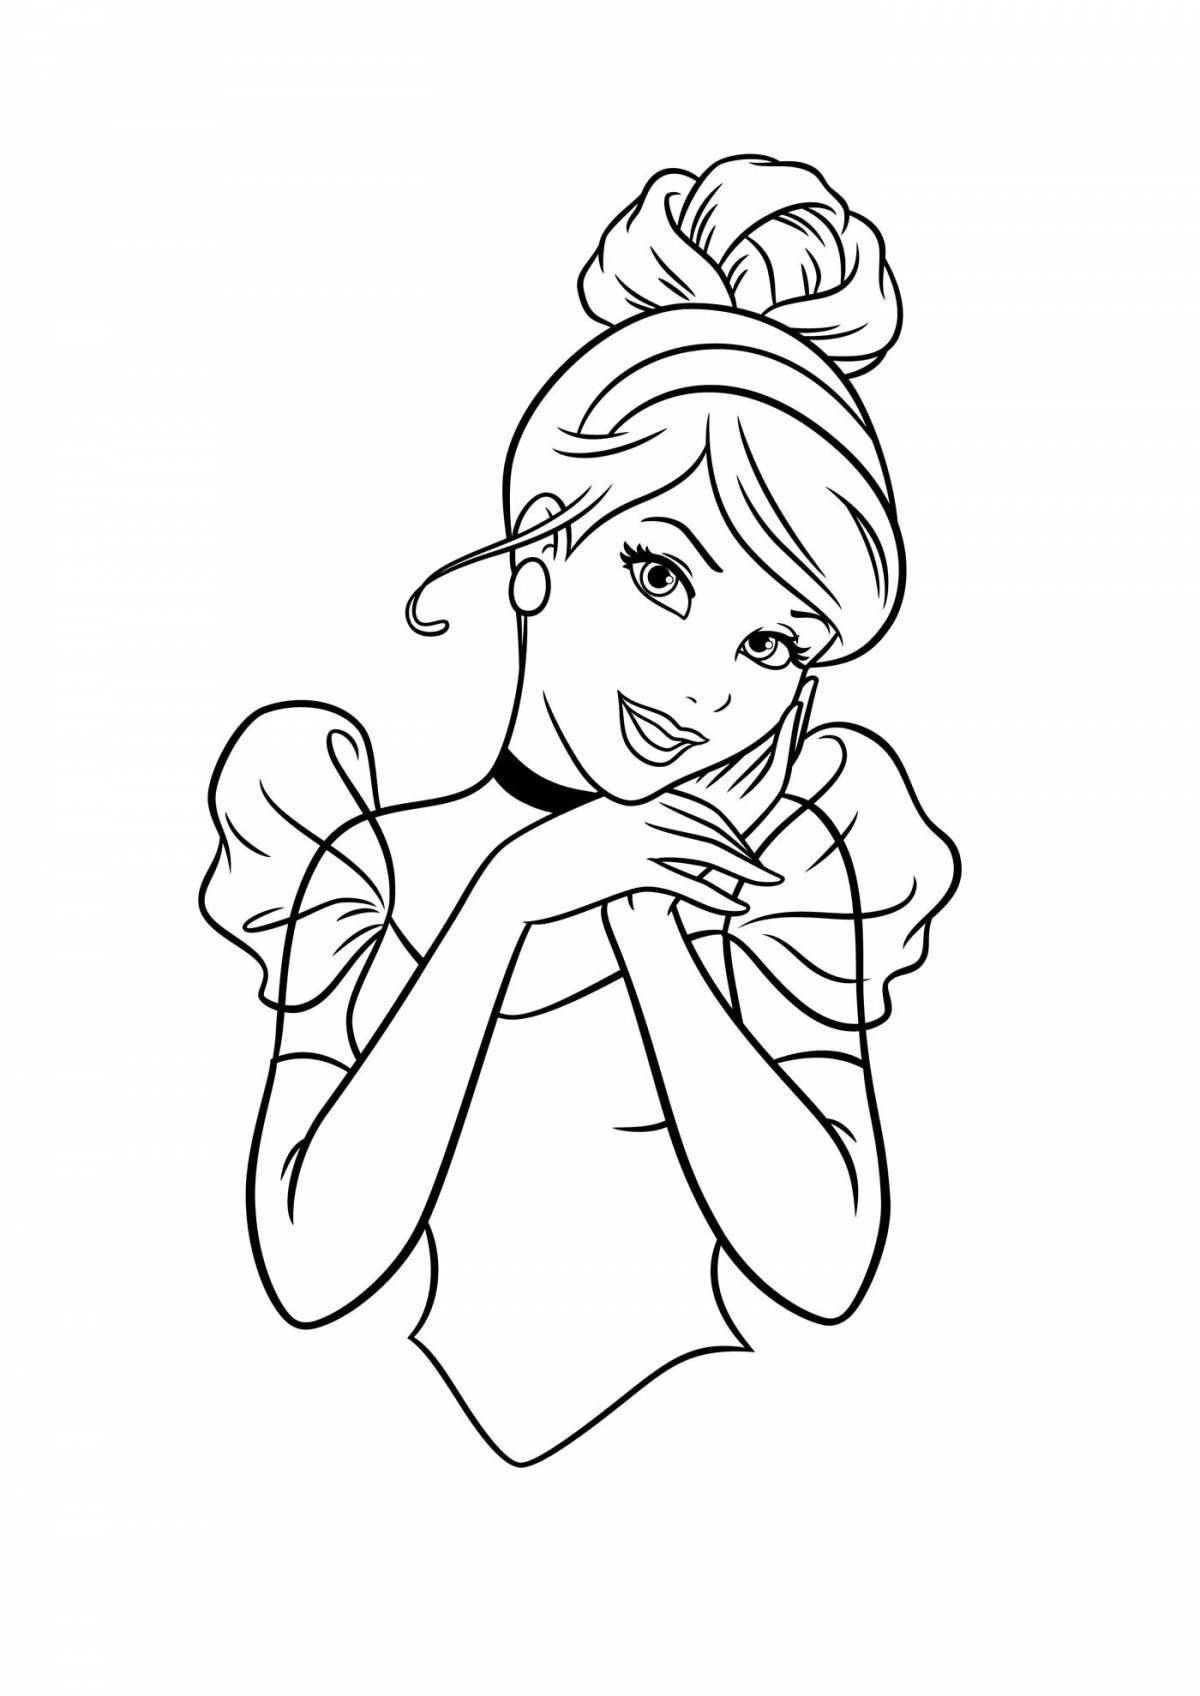 Chloe bourgeois coloring page